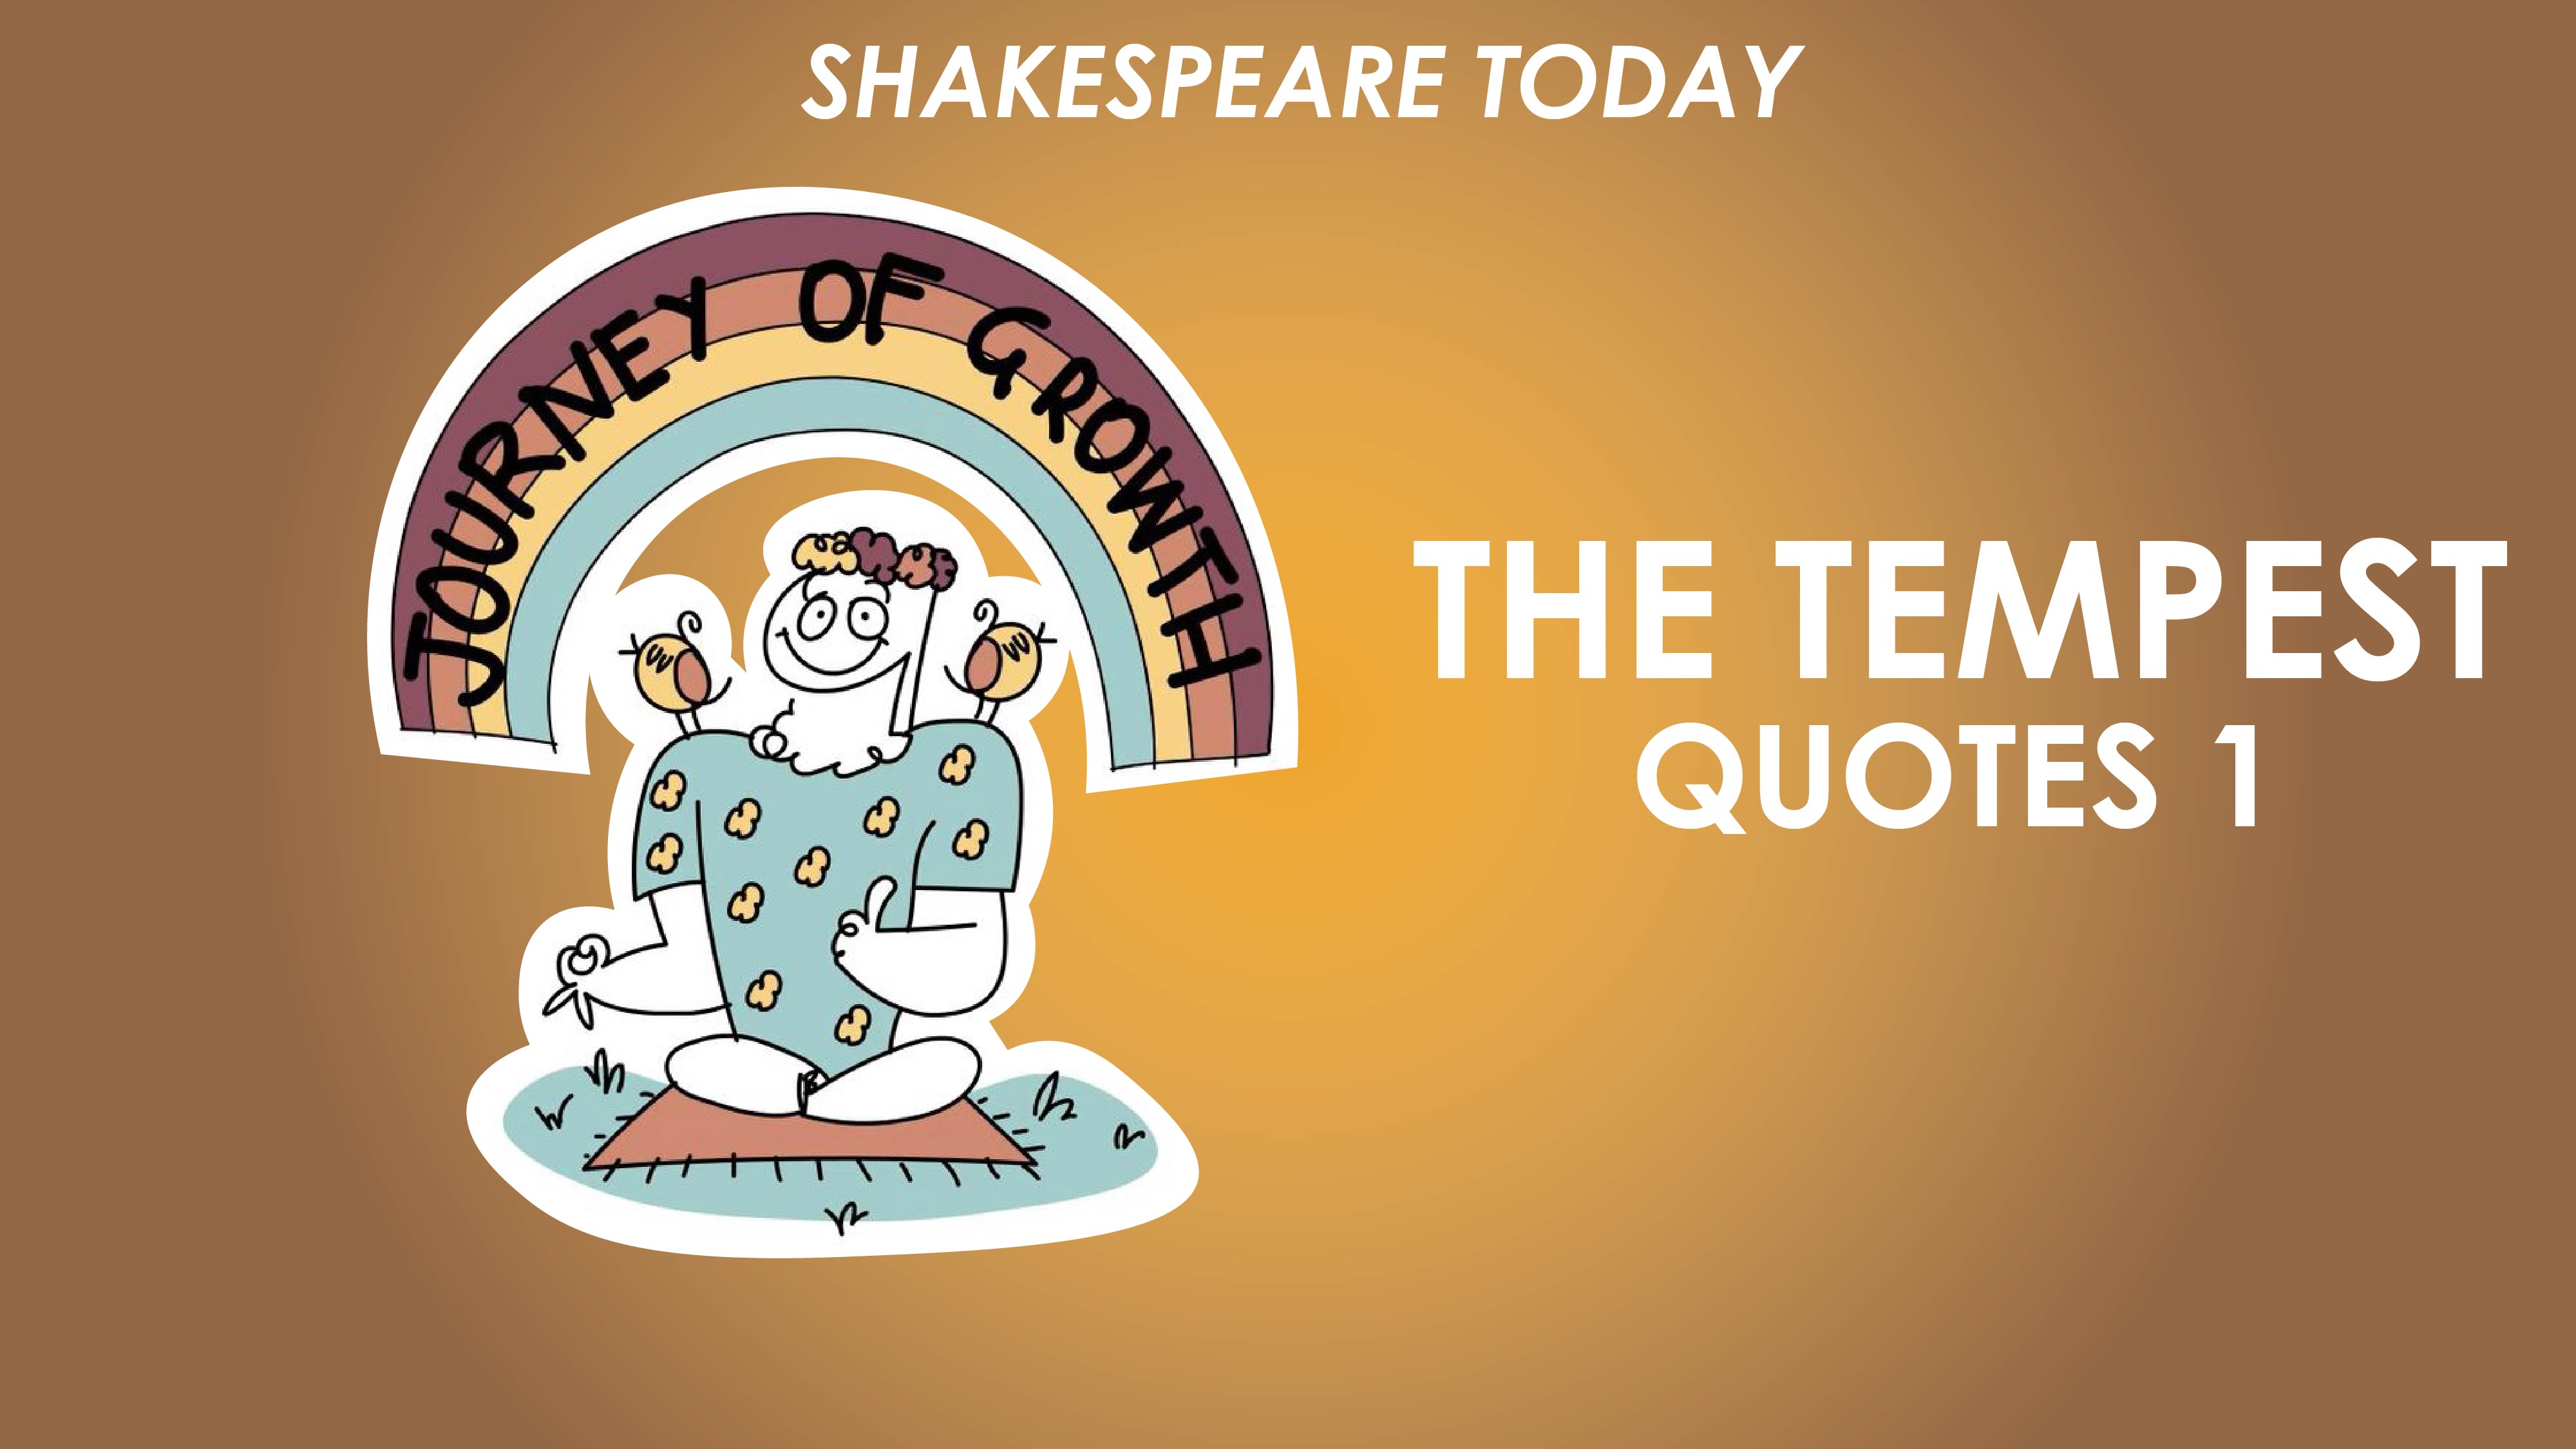 The Tempest Key Quotes Analysis Part 1 - Shakespeare Today Series